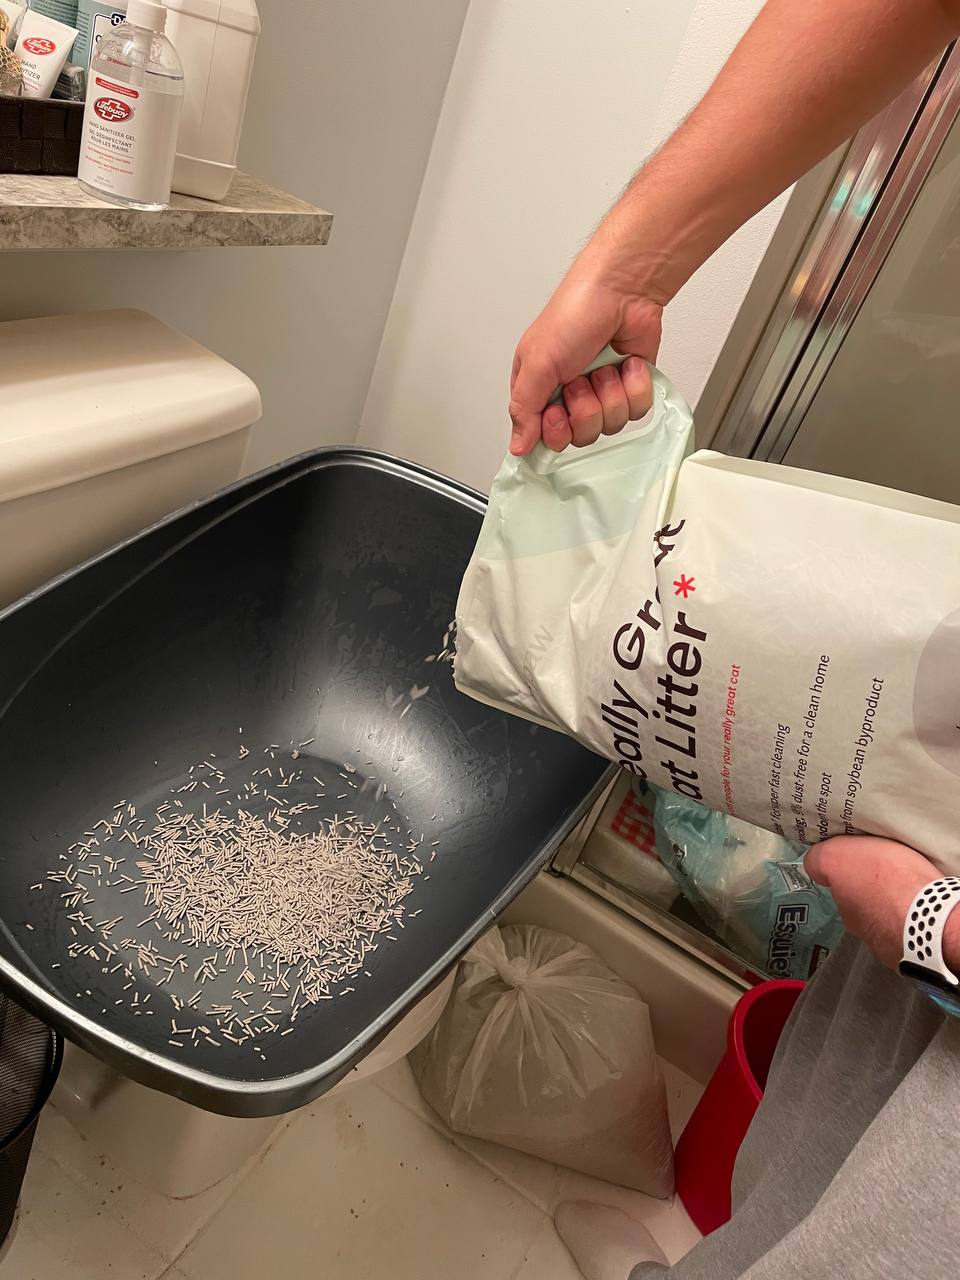 Adding Really Great Cat Litter from Tuft + Paw to my litter box